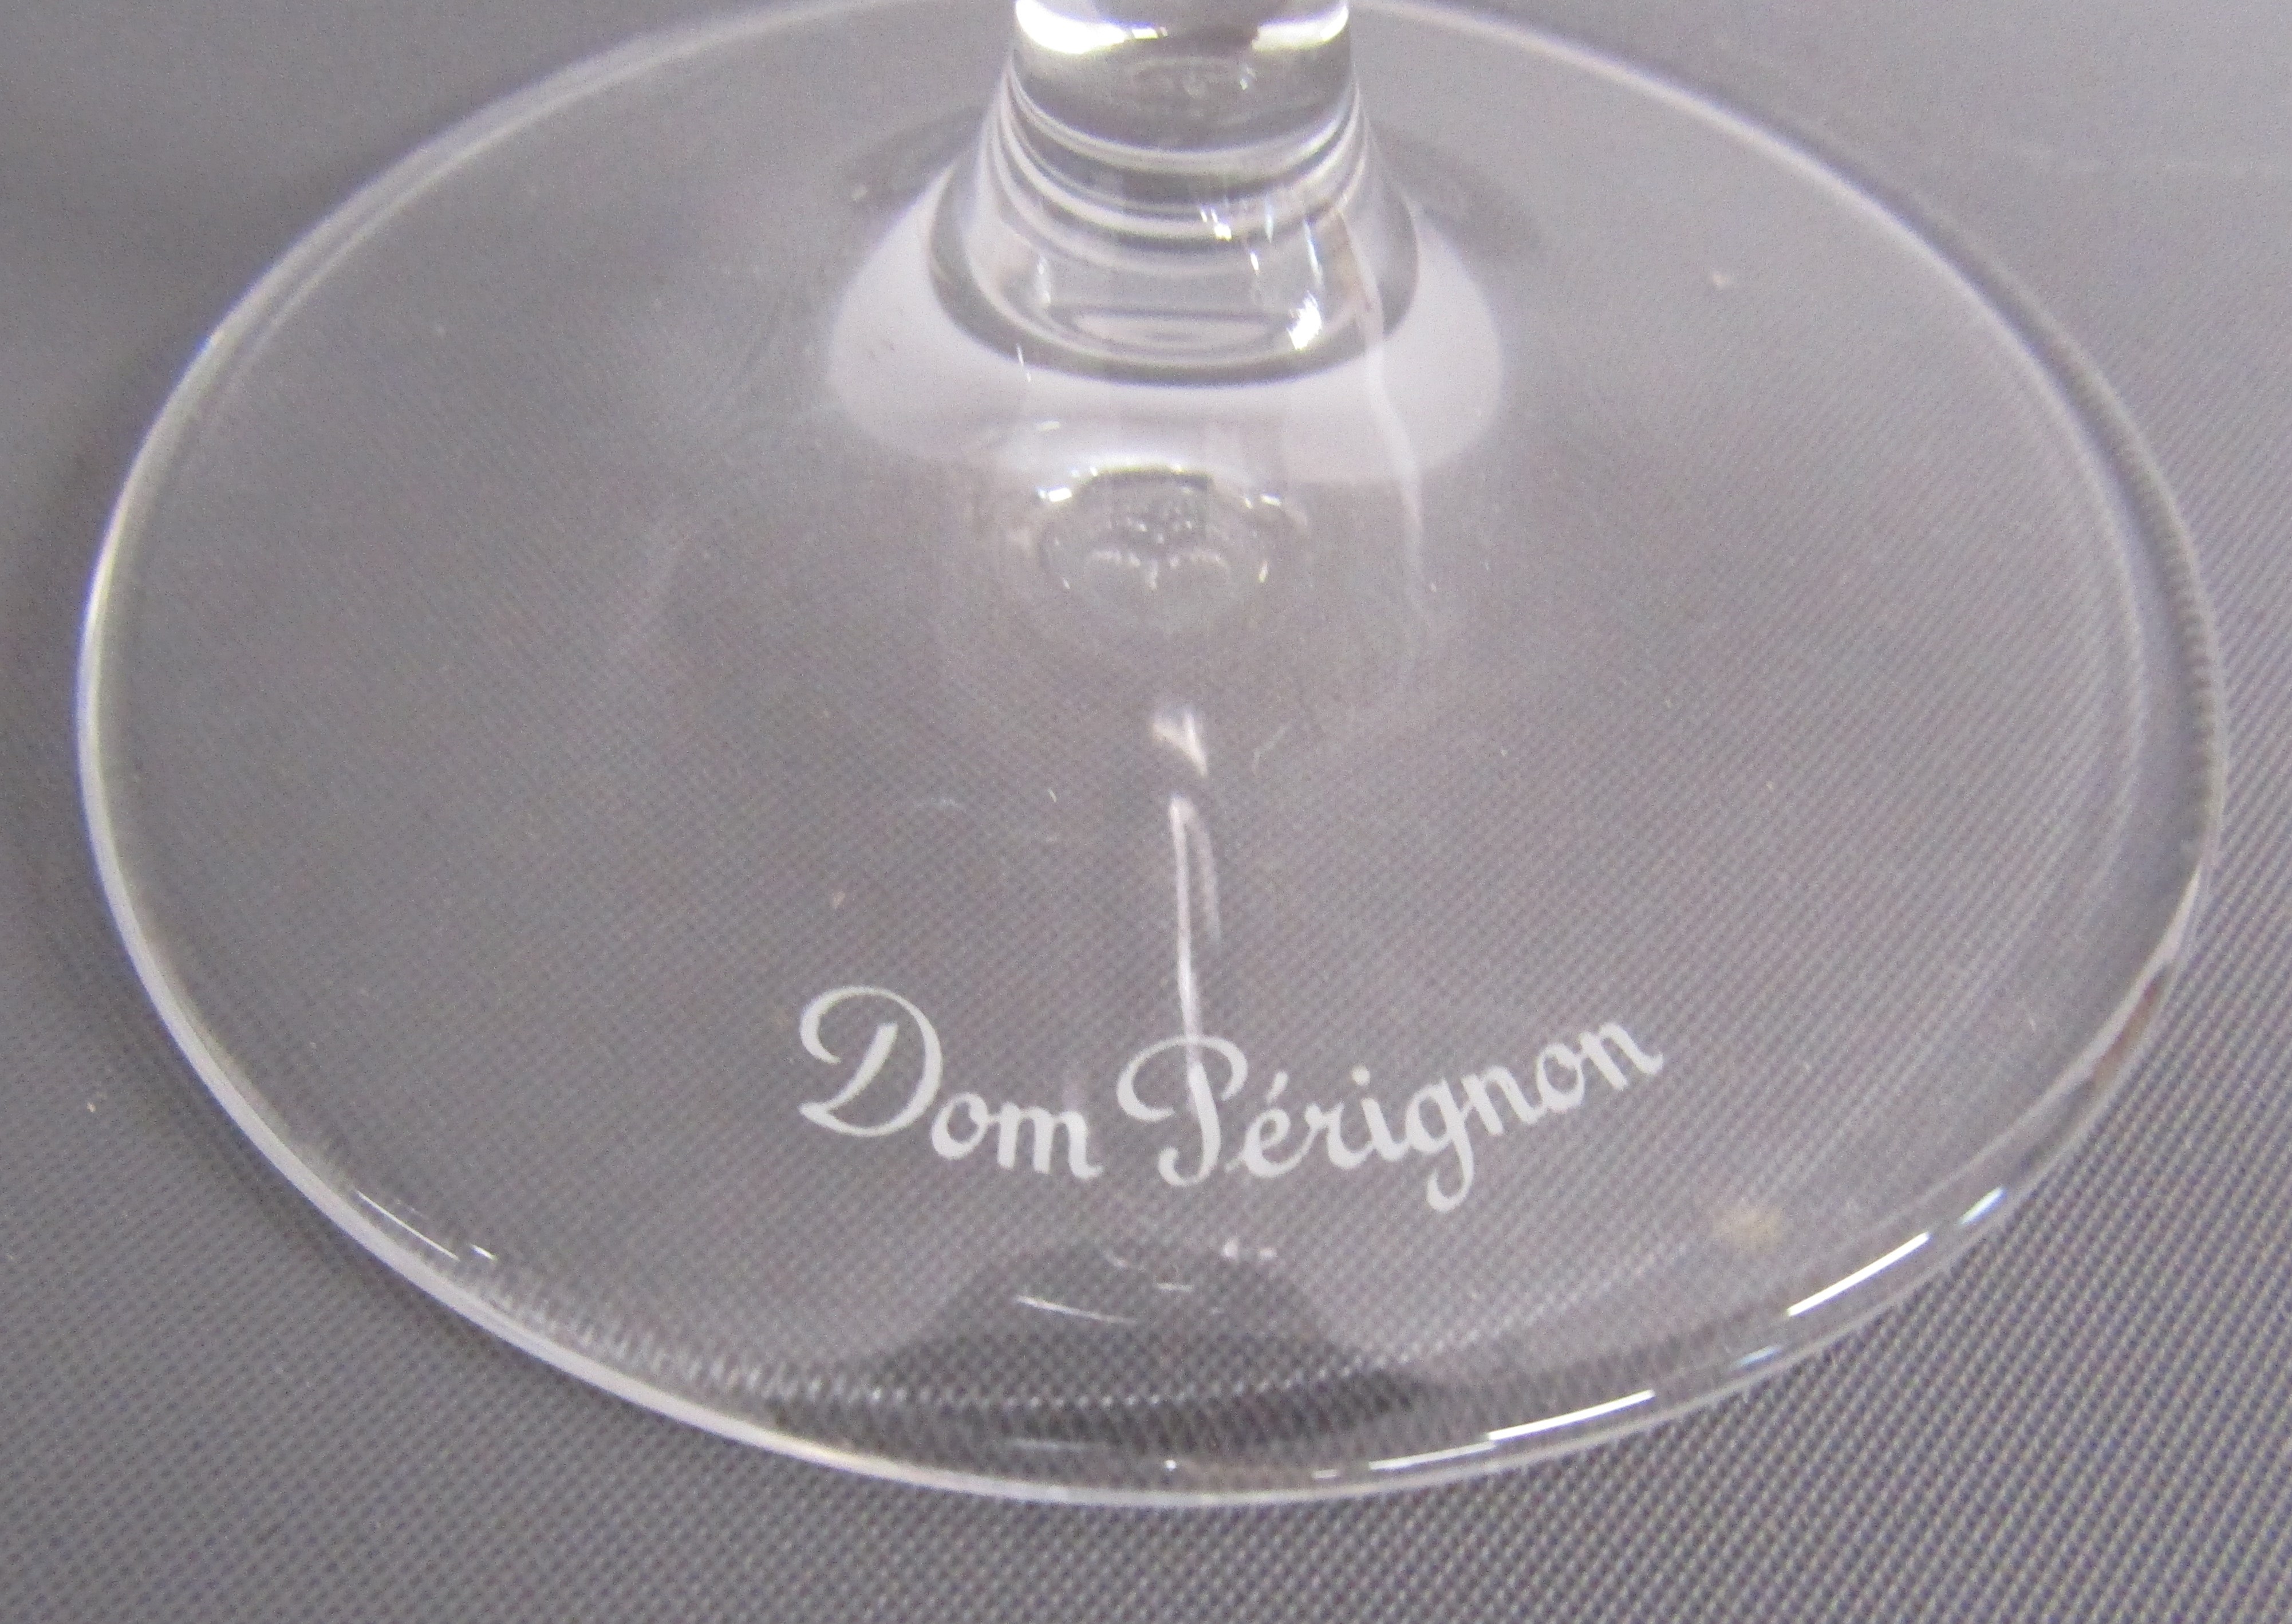 2 Dom Perignon Moet & Chandon sealed display bottles with 6 Dom Perignon Champagne flutes - Image 3 of 6